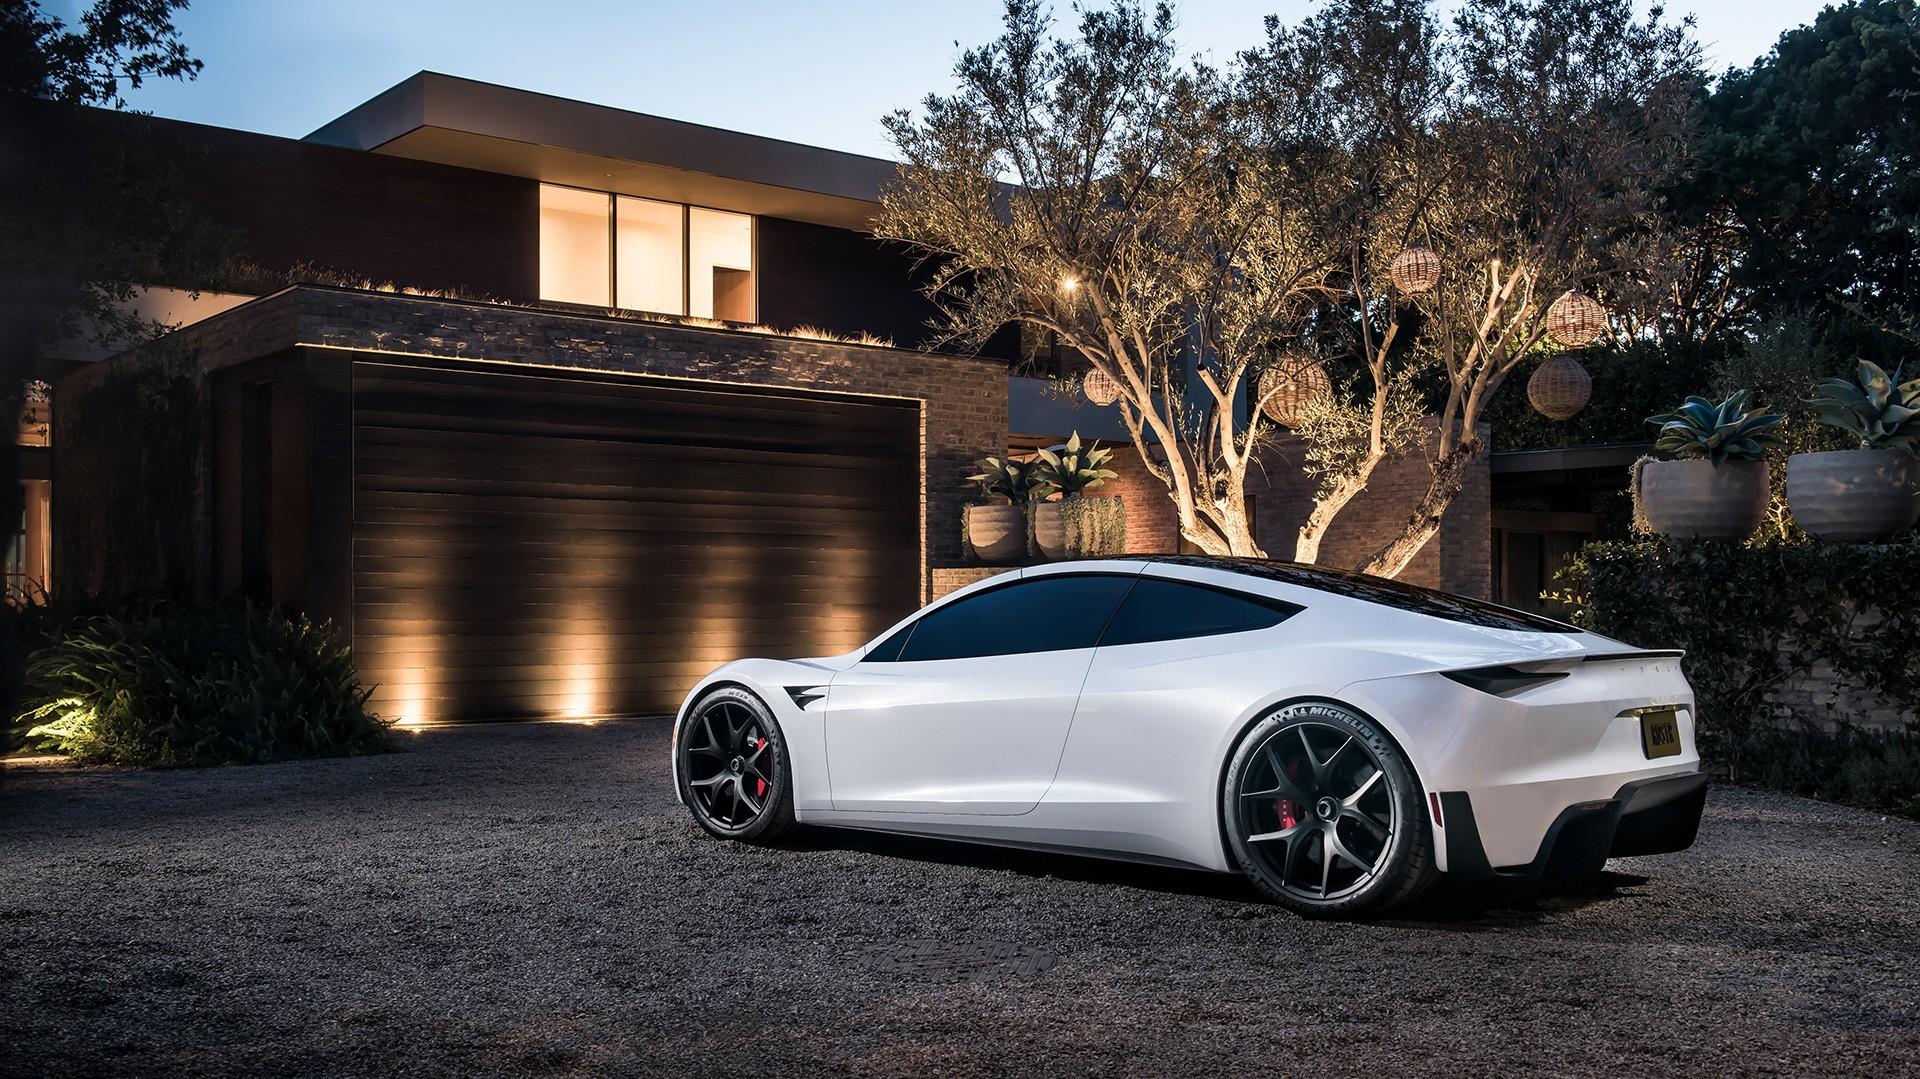 Tesla Roadster Will Be Even Faster Than The Already Bonkers